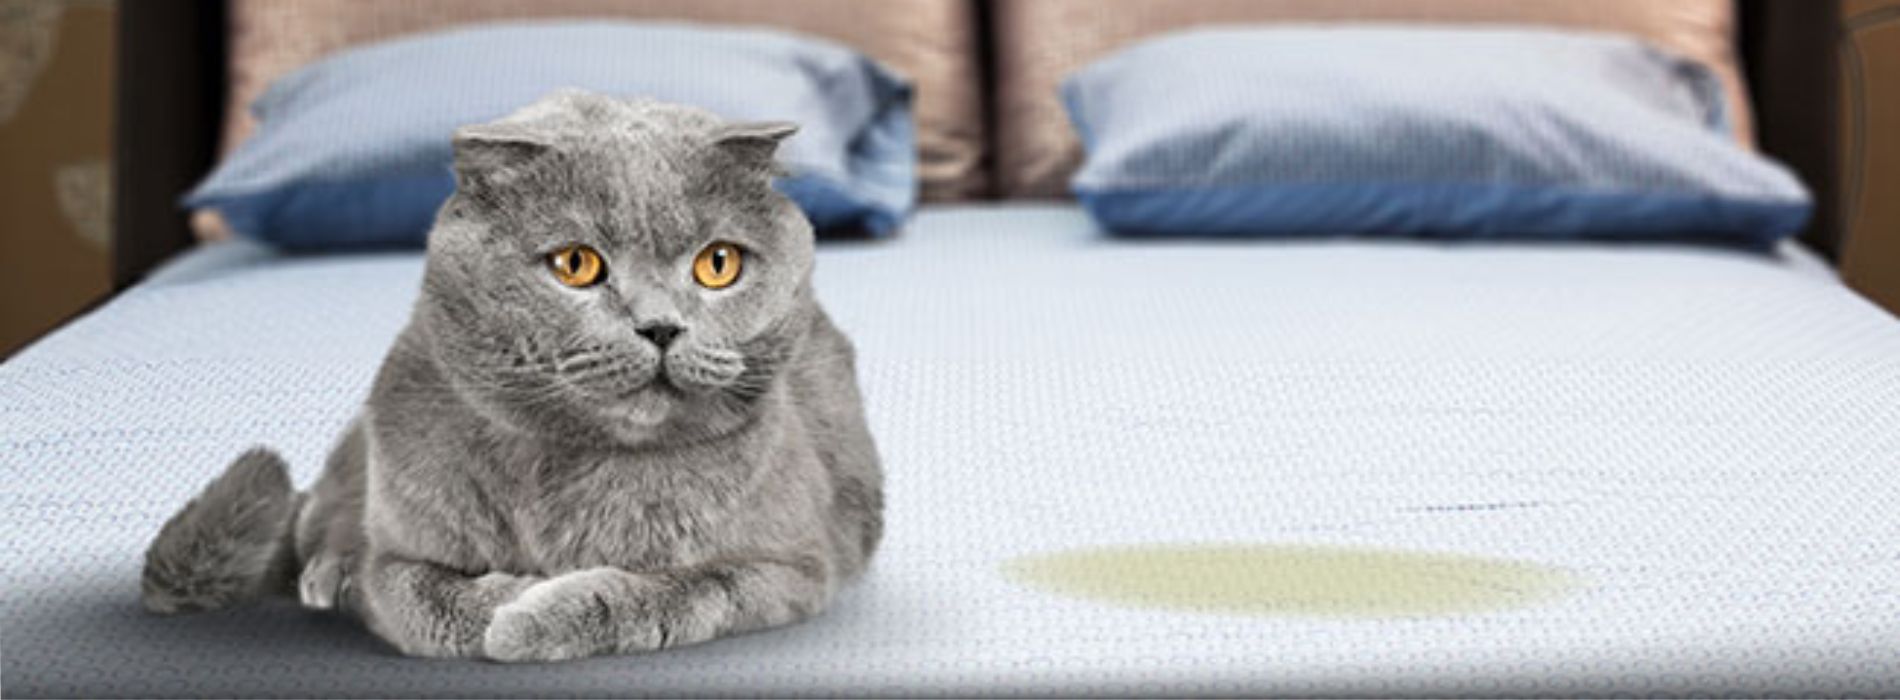 how-to-get-cat-pee-smell-out-of-couch